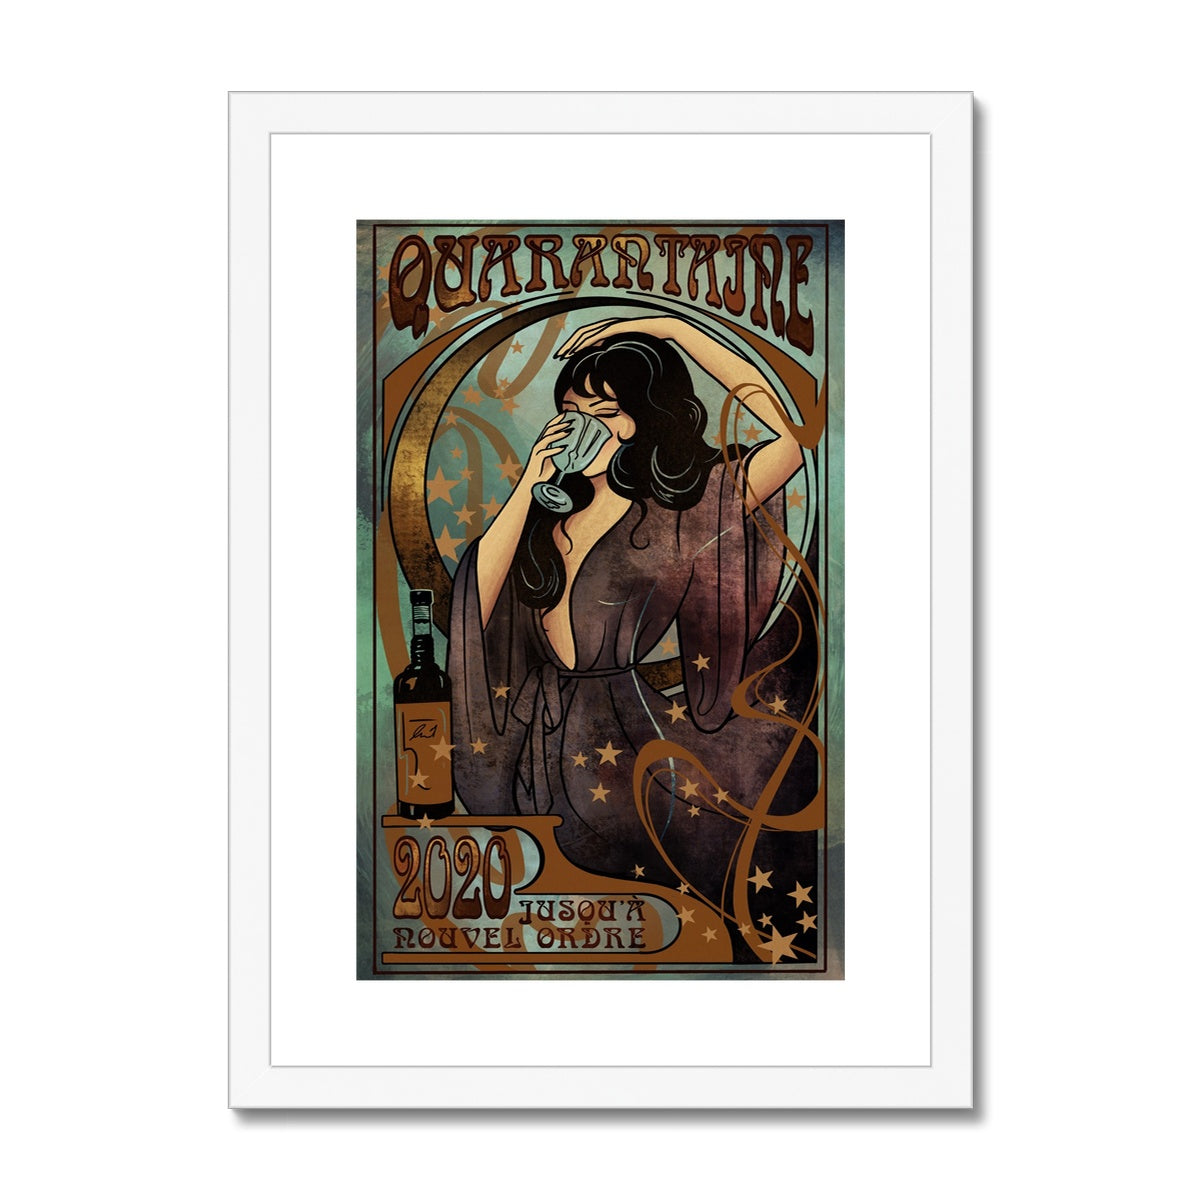 "Quarantaine - Wine Time" Framed & Mounted Print